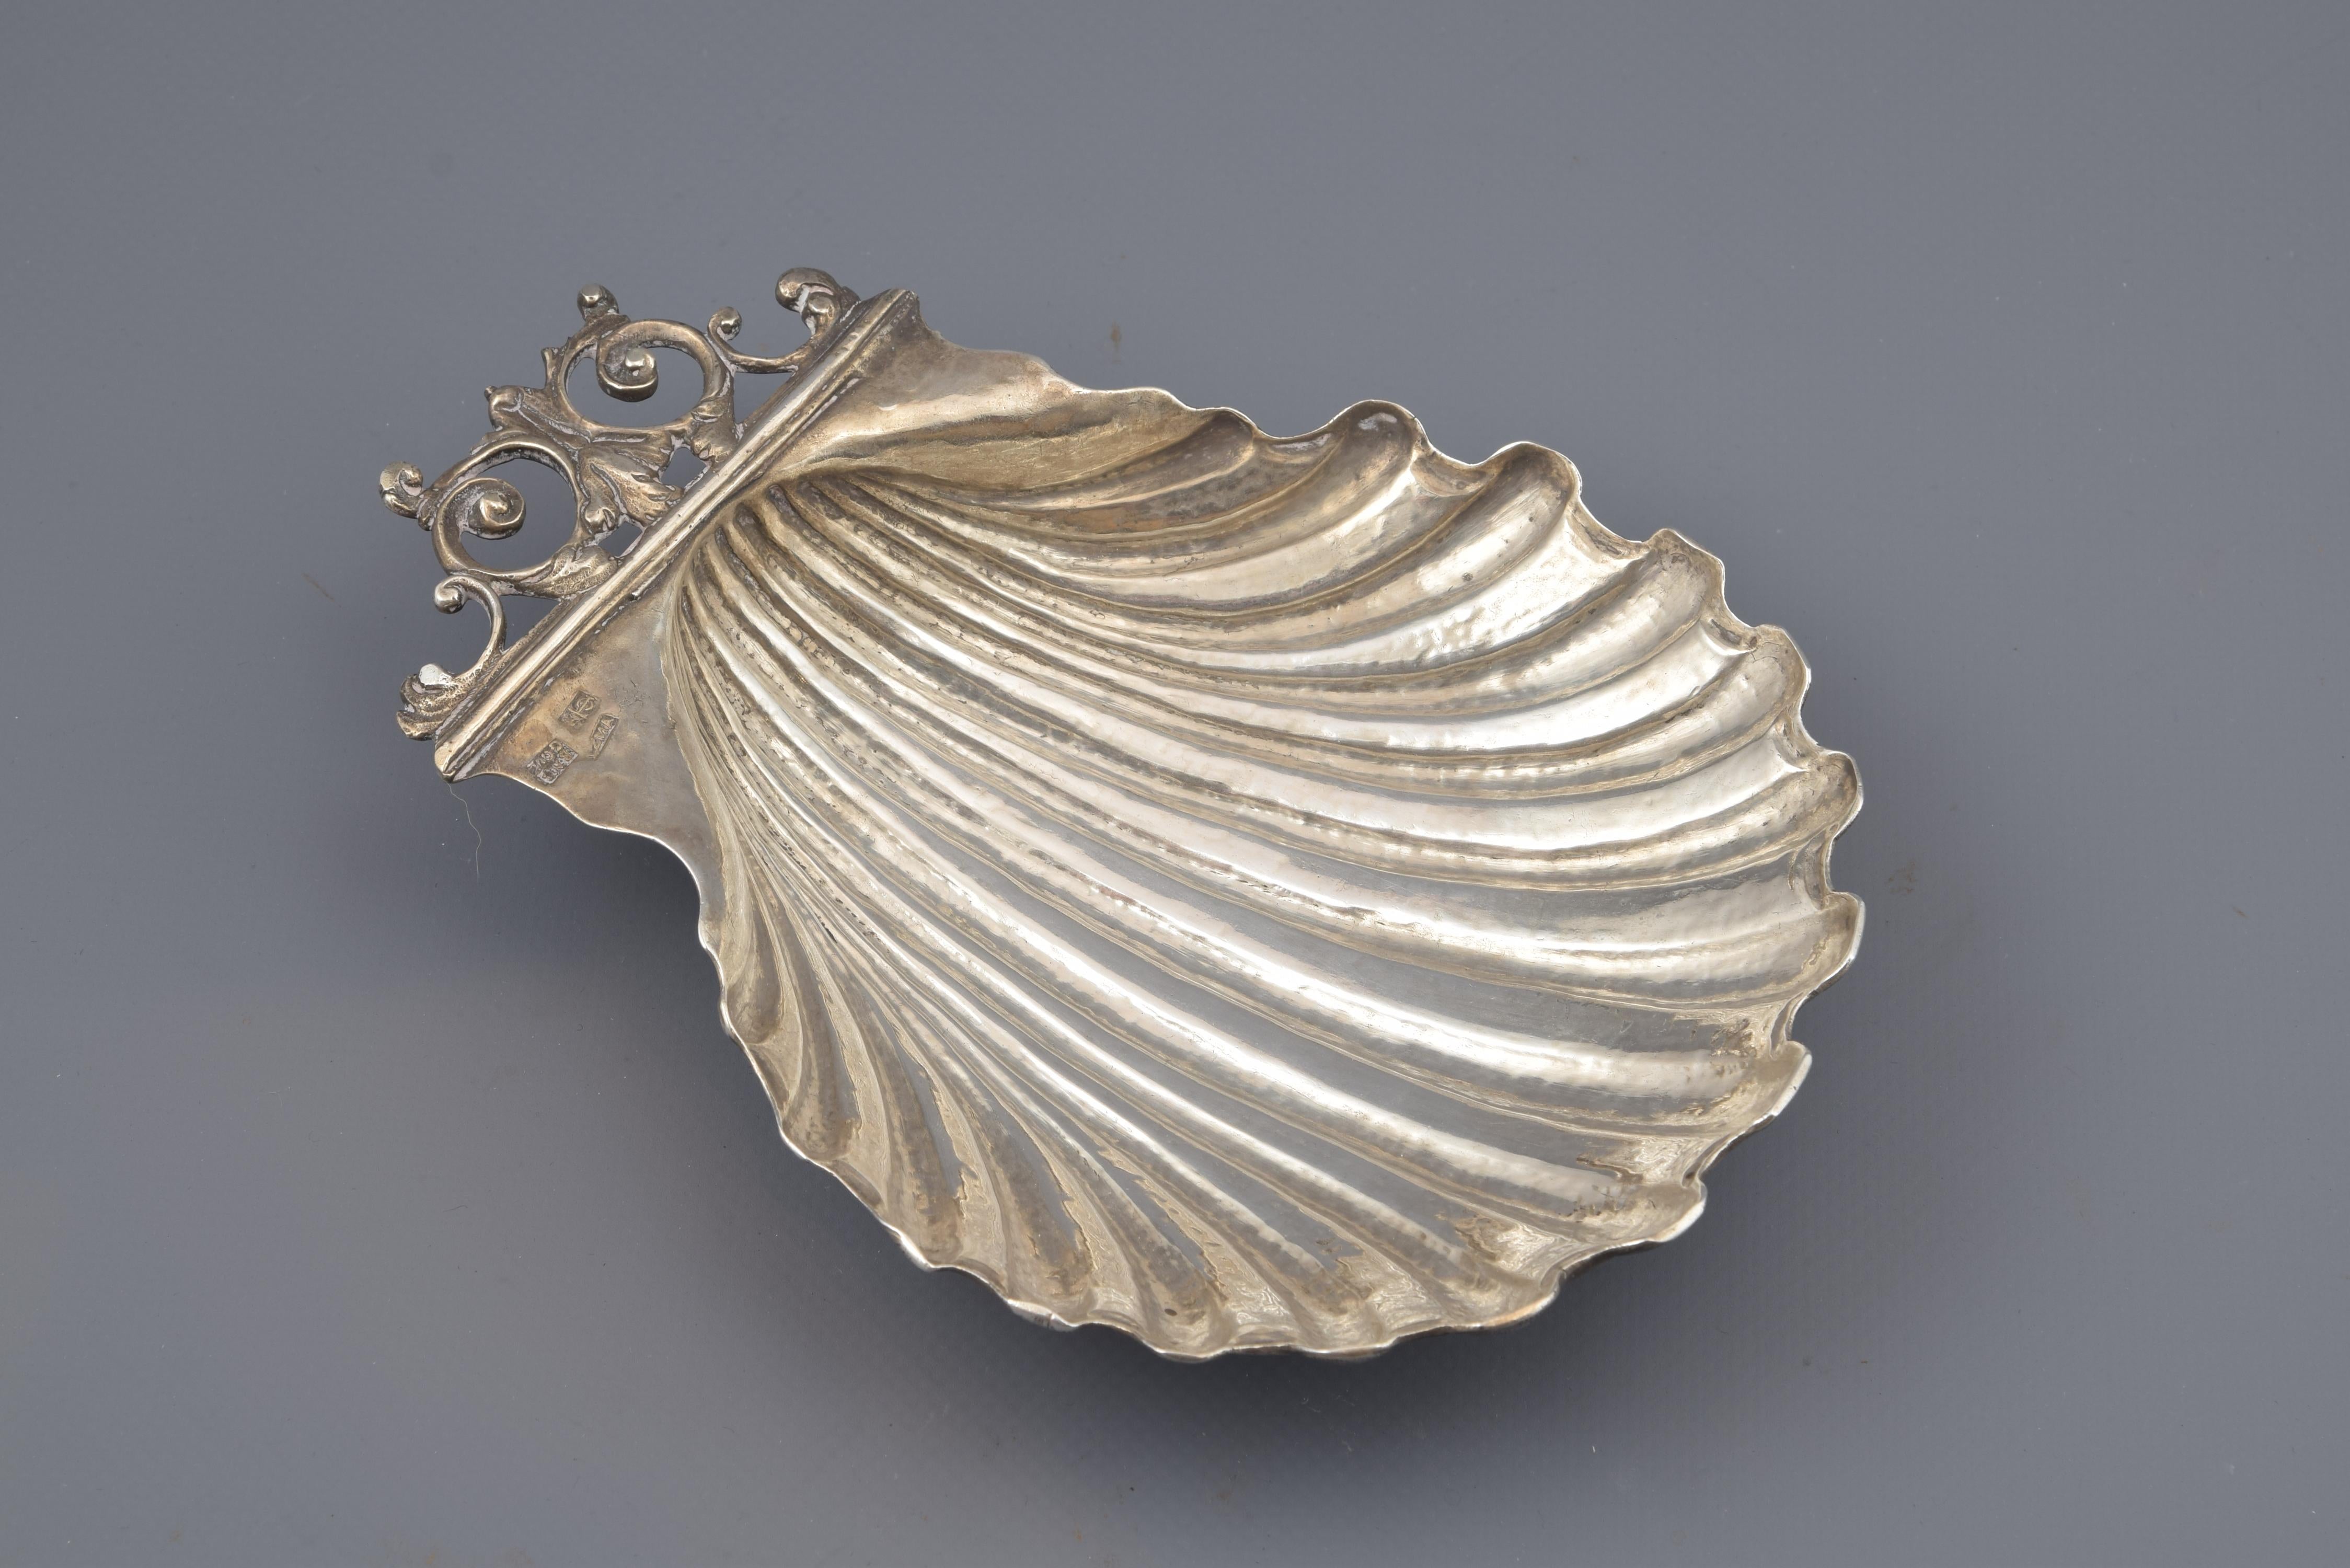 Scallop. Silver in its color. Diego Rodríguez de Lezana or Lizana and Bartolomé González. Toledo, Spain, circa mid-18th century.
With hallmarks.
Silver venera in its color with bright interior and exterior worked with fine lines to tinge the